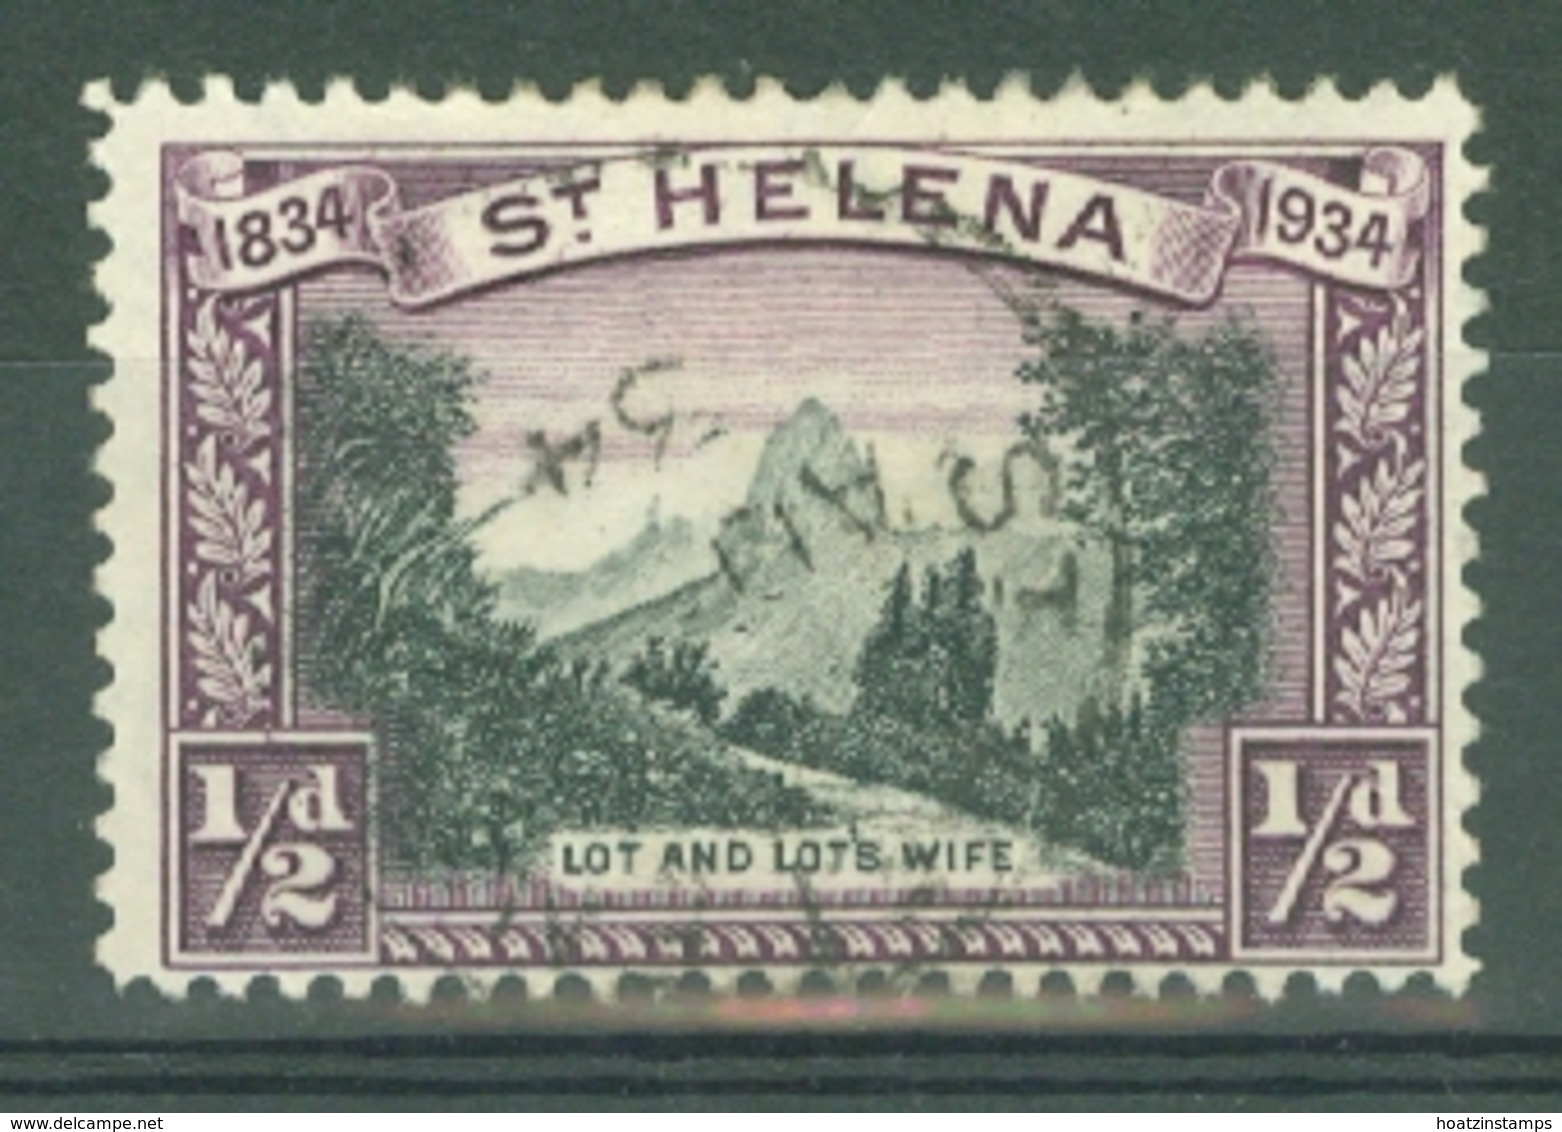 St Helena: 1934   Centenary Of British Colonisation     SG114    ½d     Used - Isola Di Sant'Elena